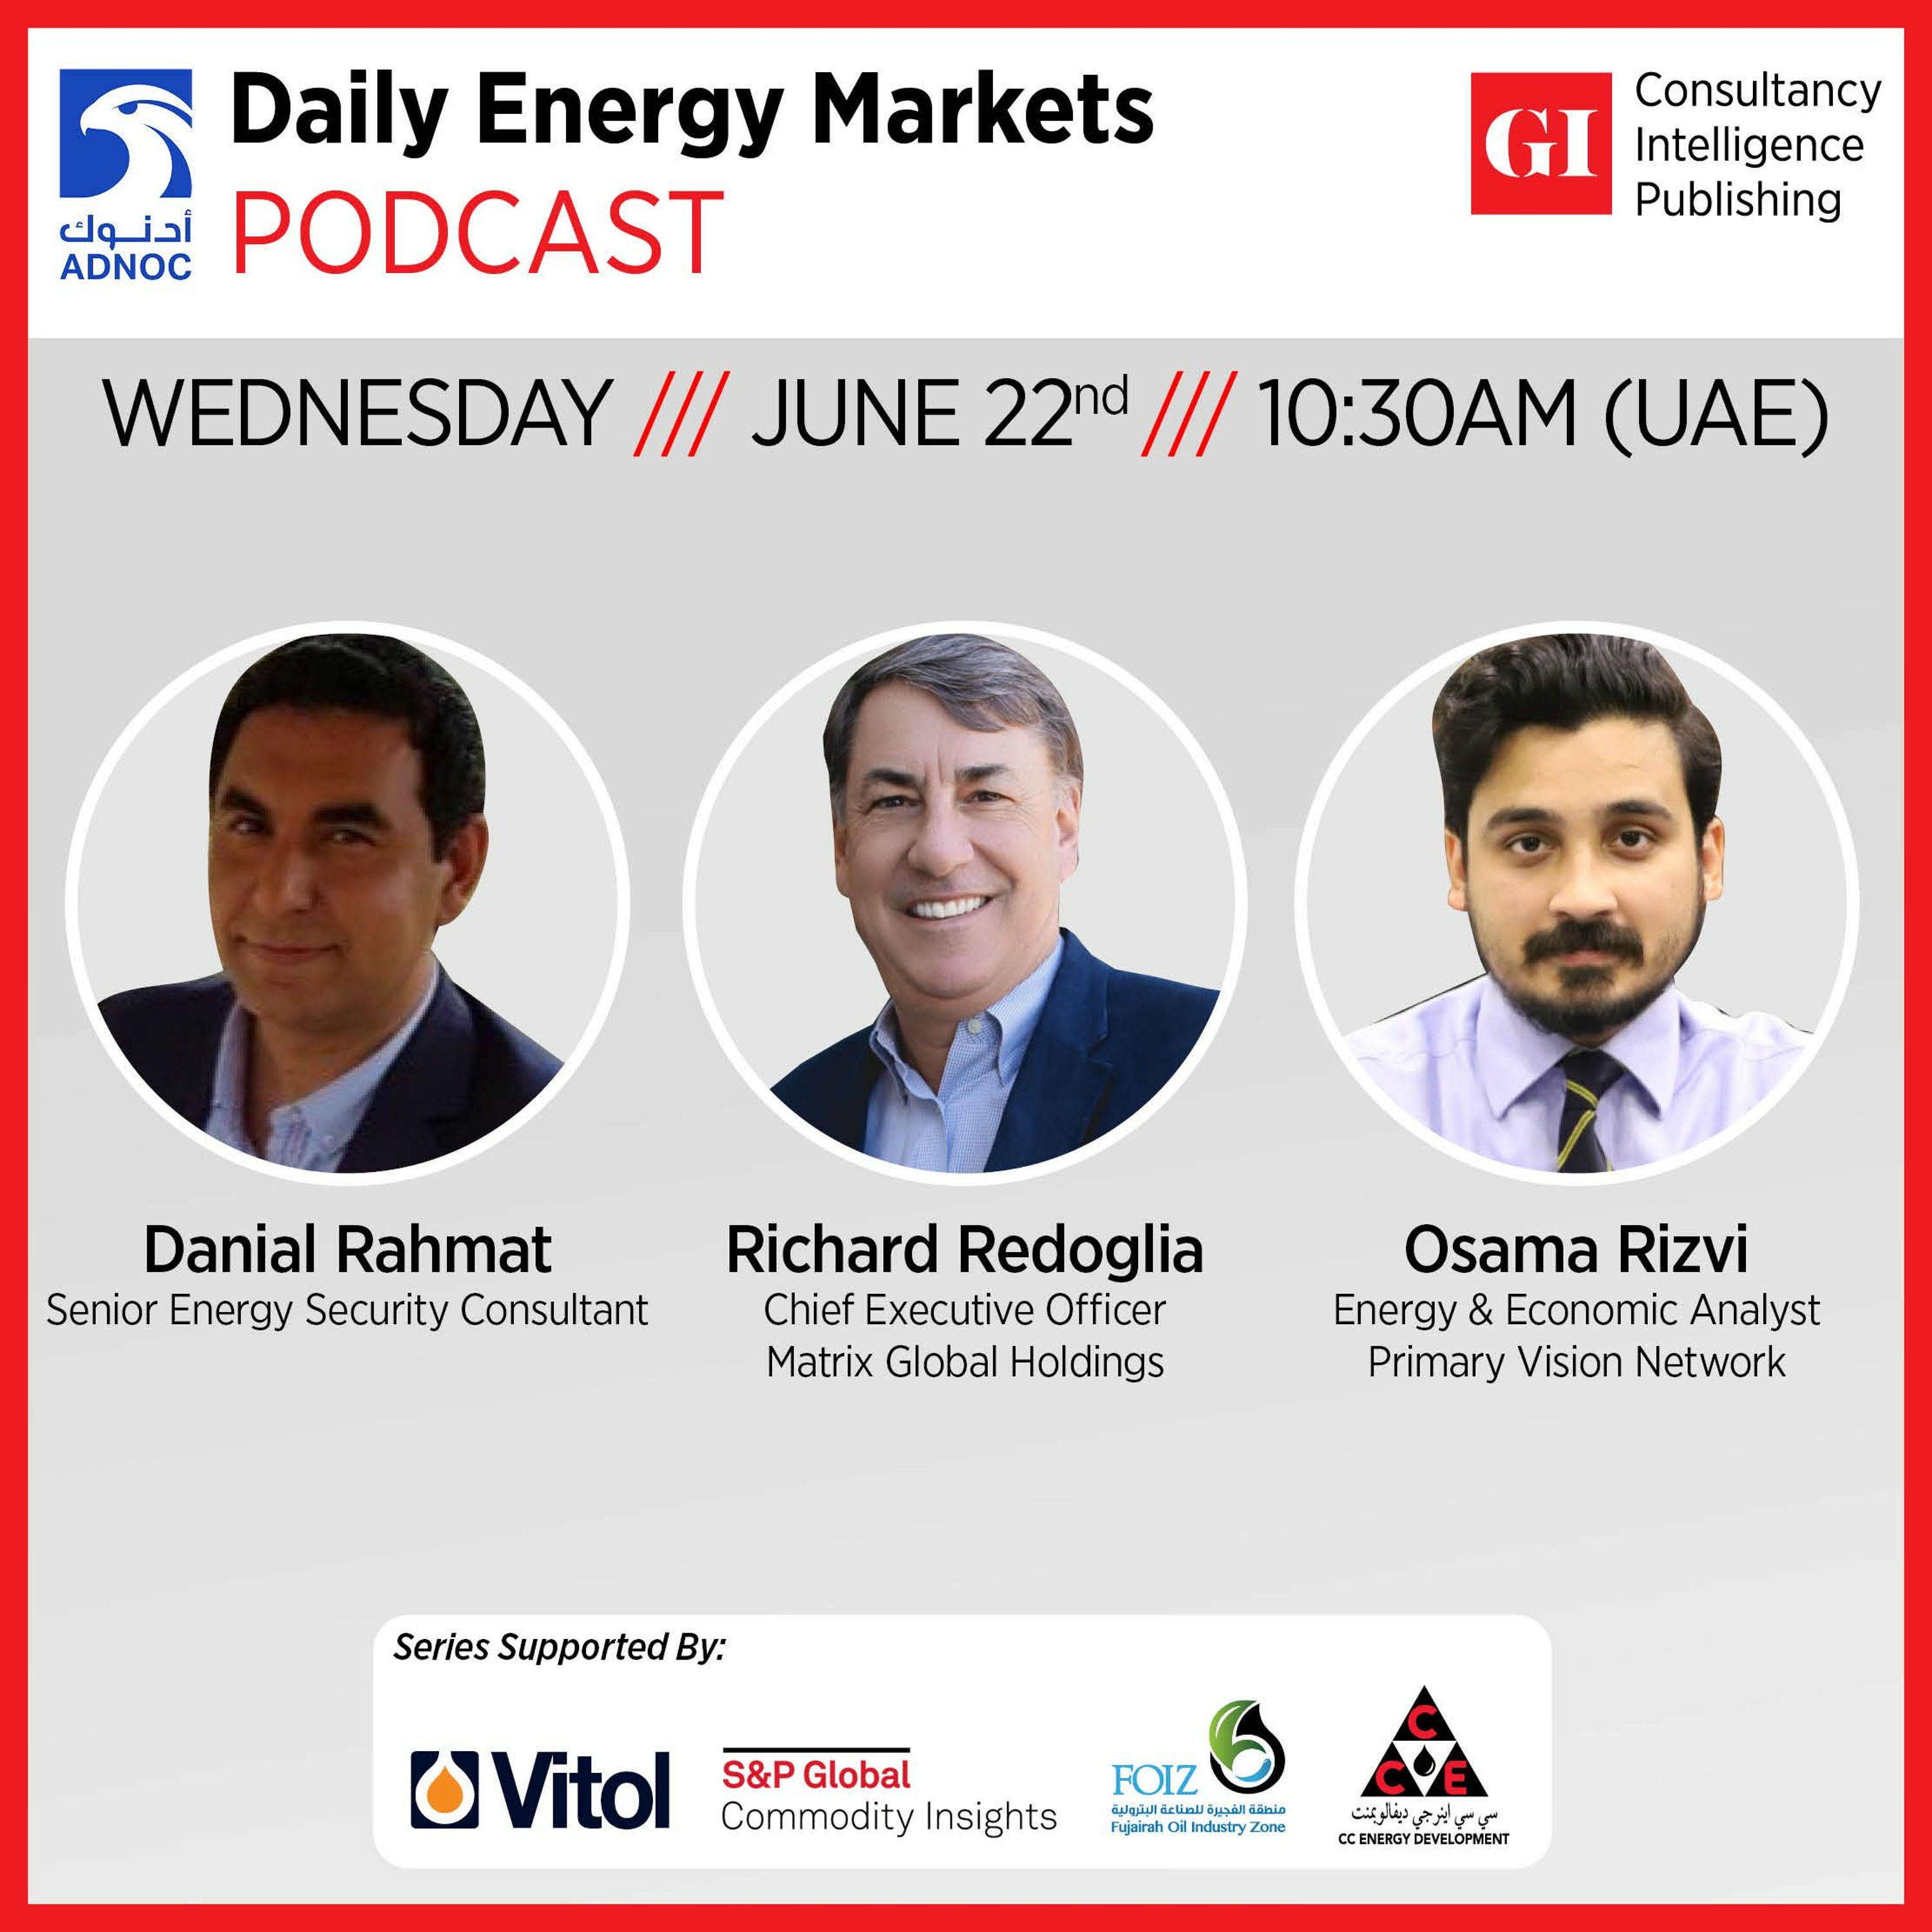 PODCAST: Daily Energy Markets - June 22